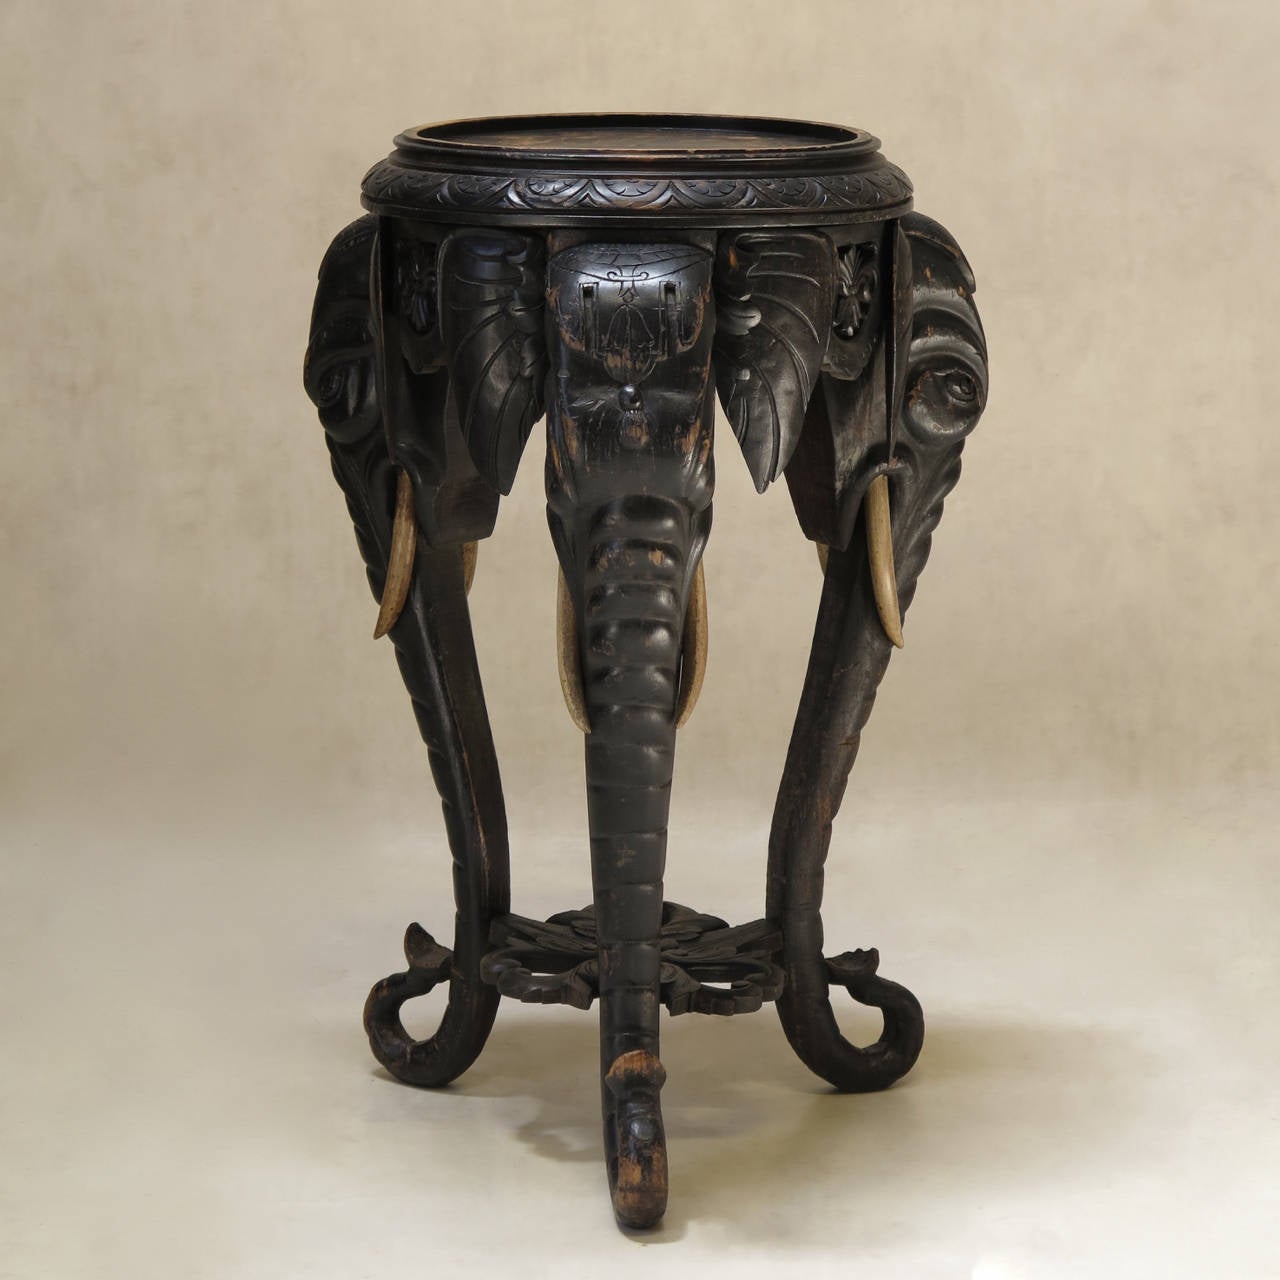 Exotic Napoleon III period ebonized tripod occasional table or plant stand, the legs representing elephant heads and trunks, nicely carved, the wood tusks painted ivory color.